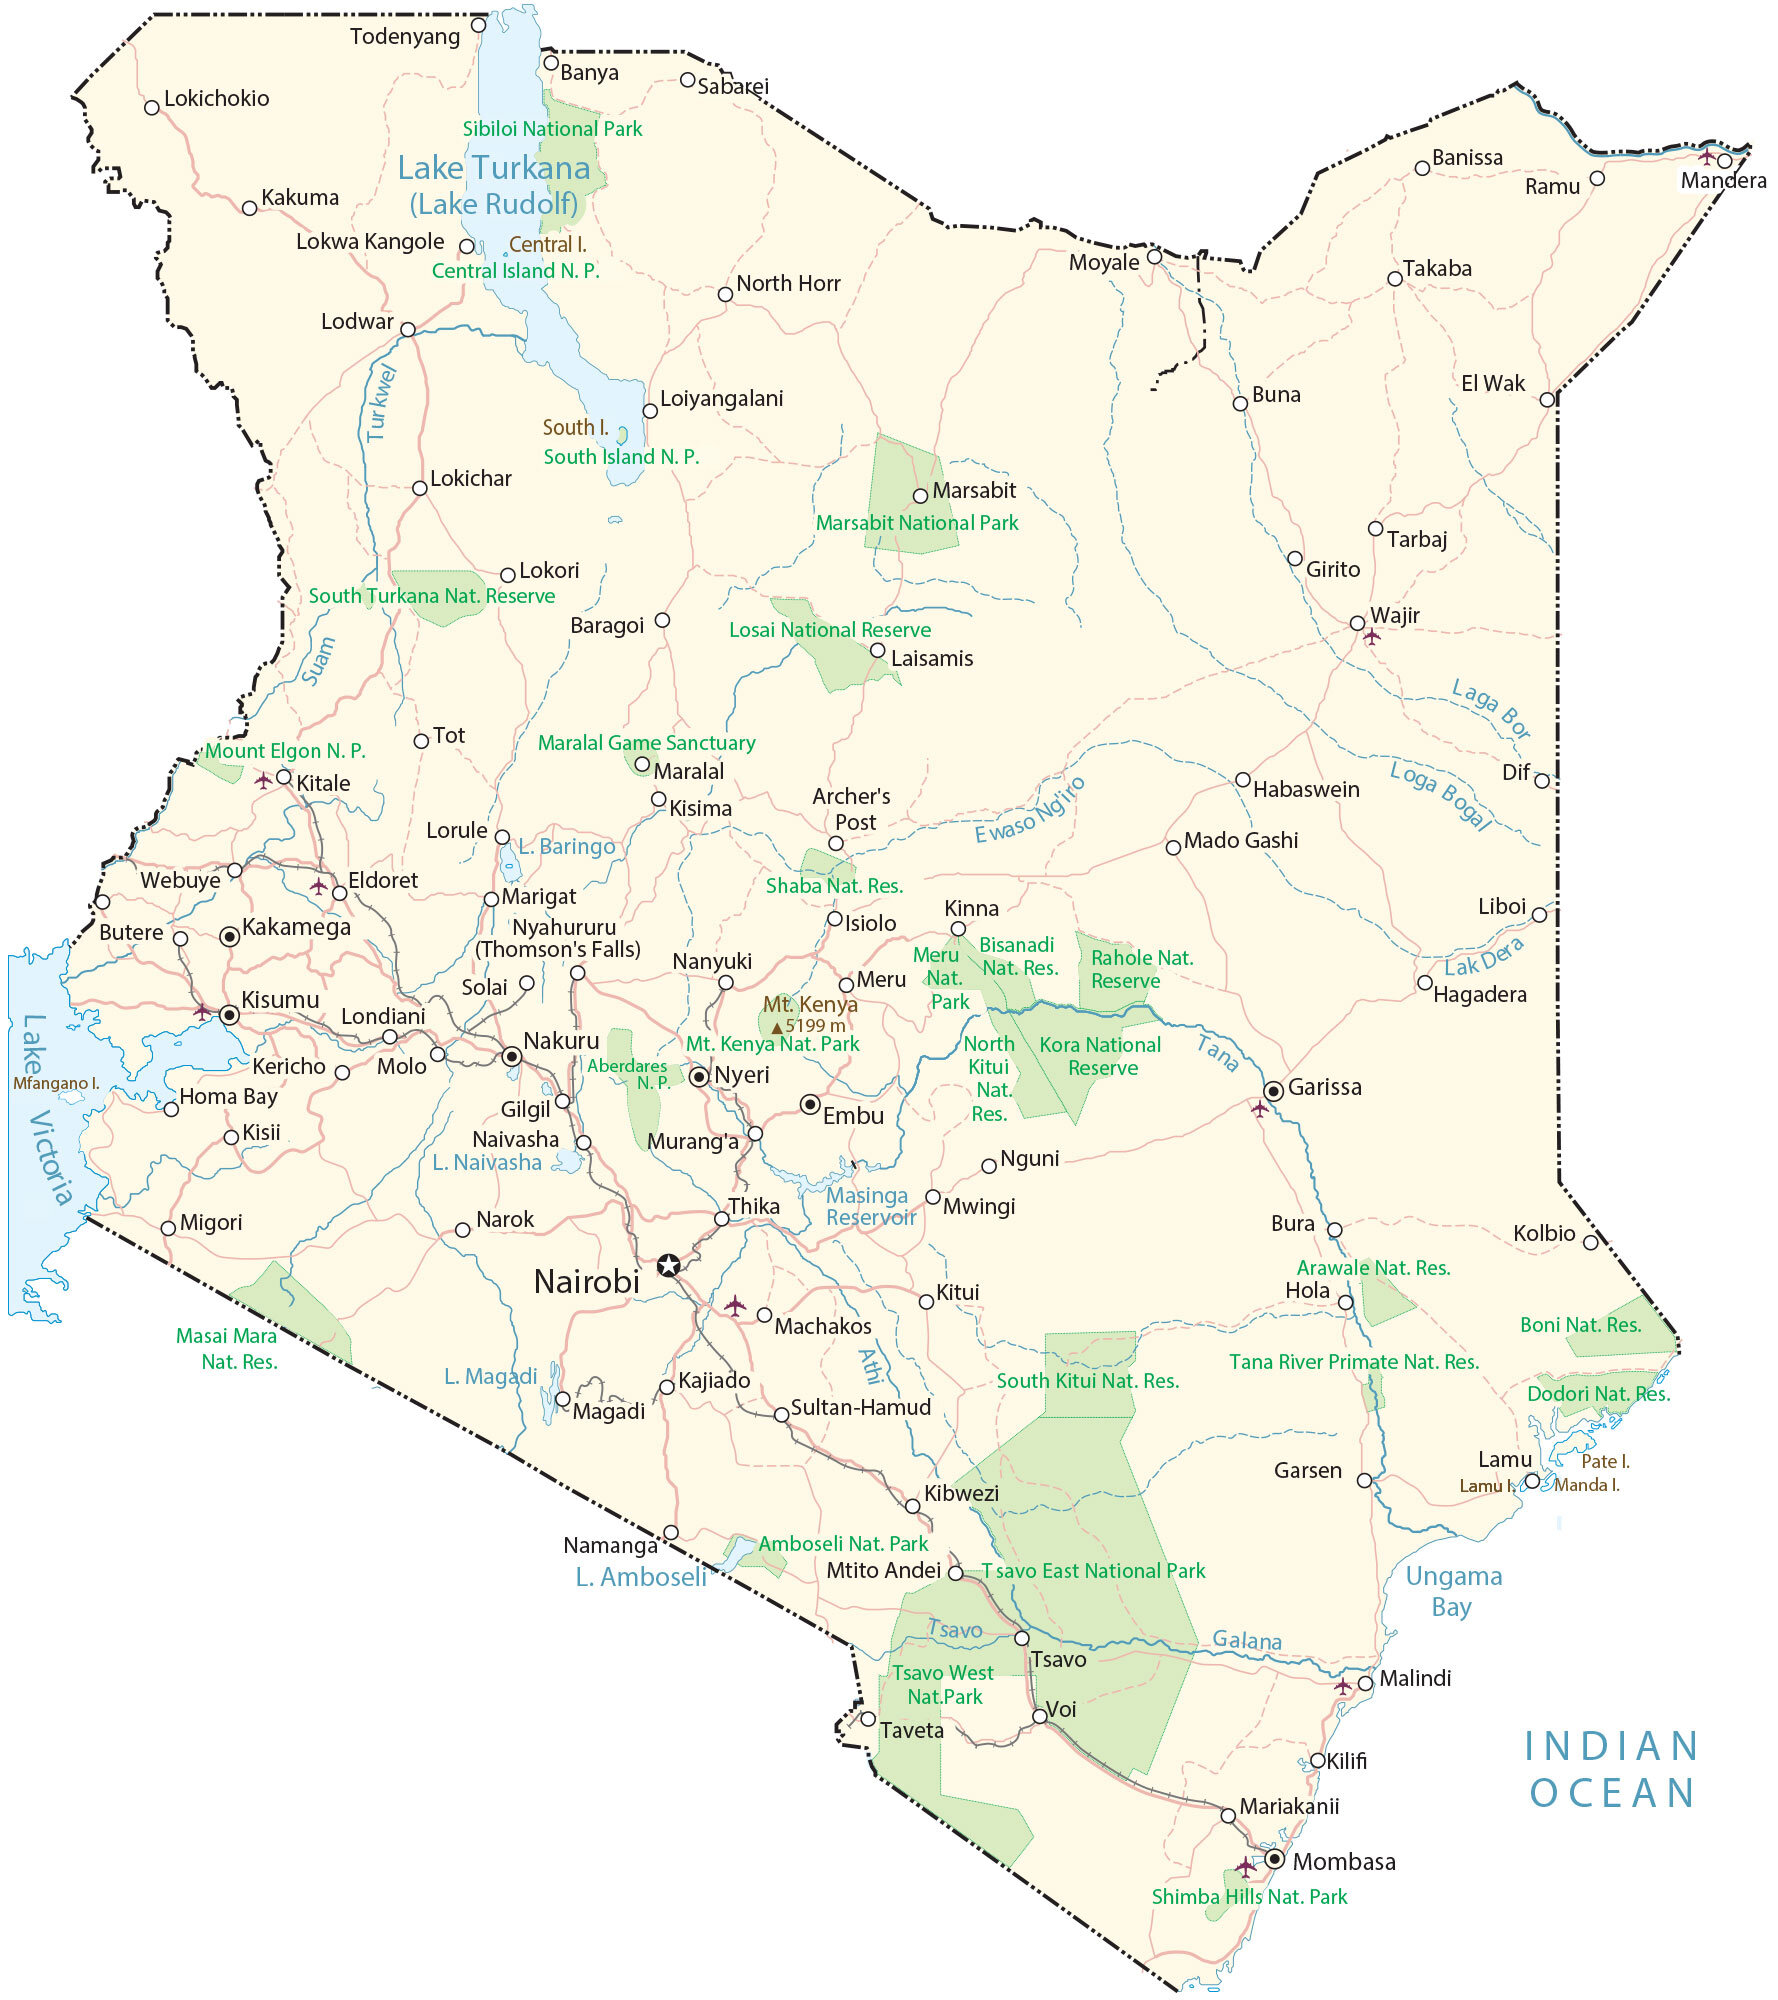 Map of Kenya - Cities and Parks - GIS Geography